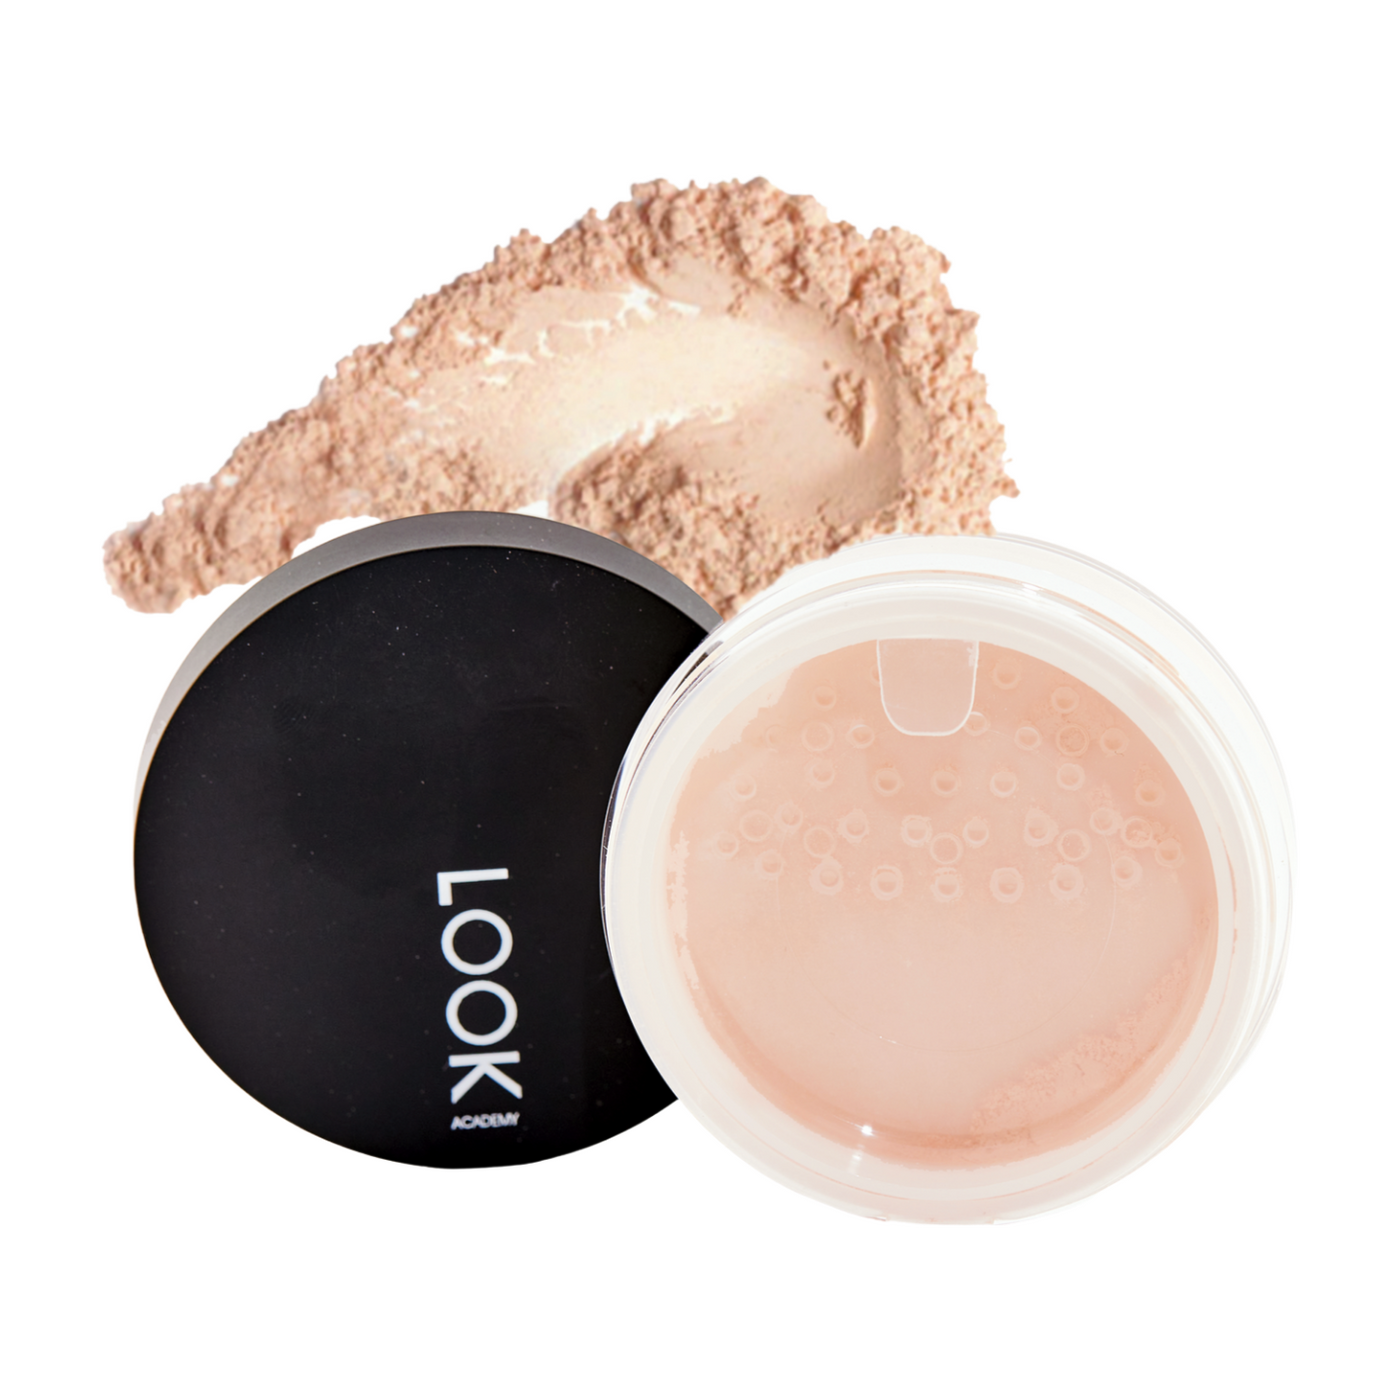 Look Academy™ Pro-Series Mineral Veil Finishing Powder